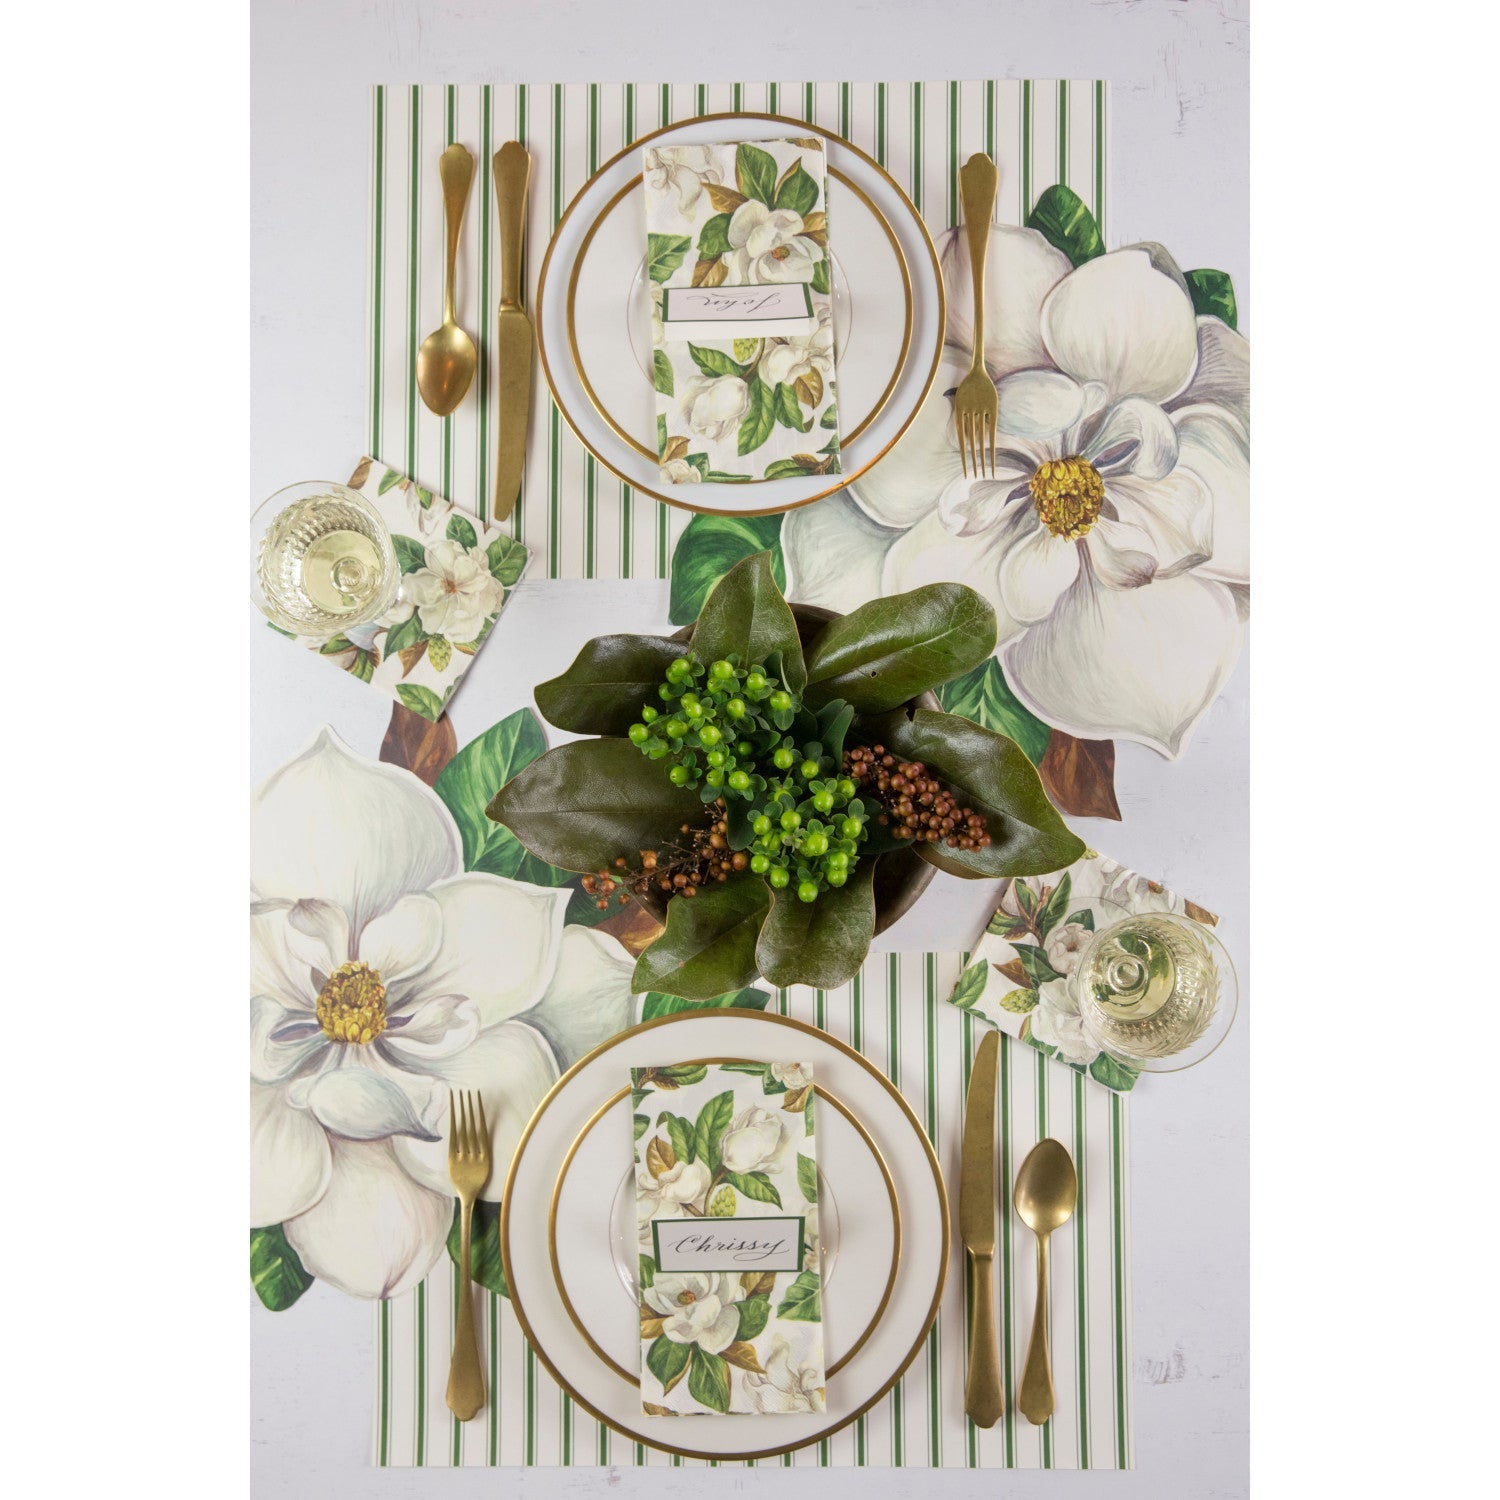 An elegant floral table setting with Magnolia Guest Napkins centered on the plates, and Magnolia Cocktail Napkins under the wine glasses, from above.